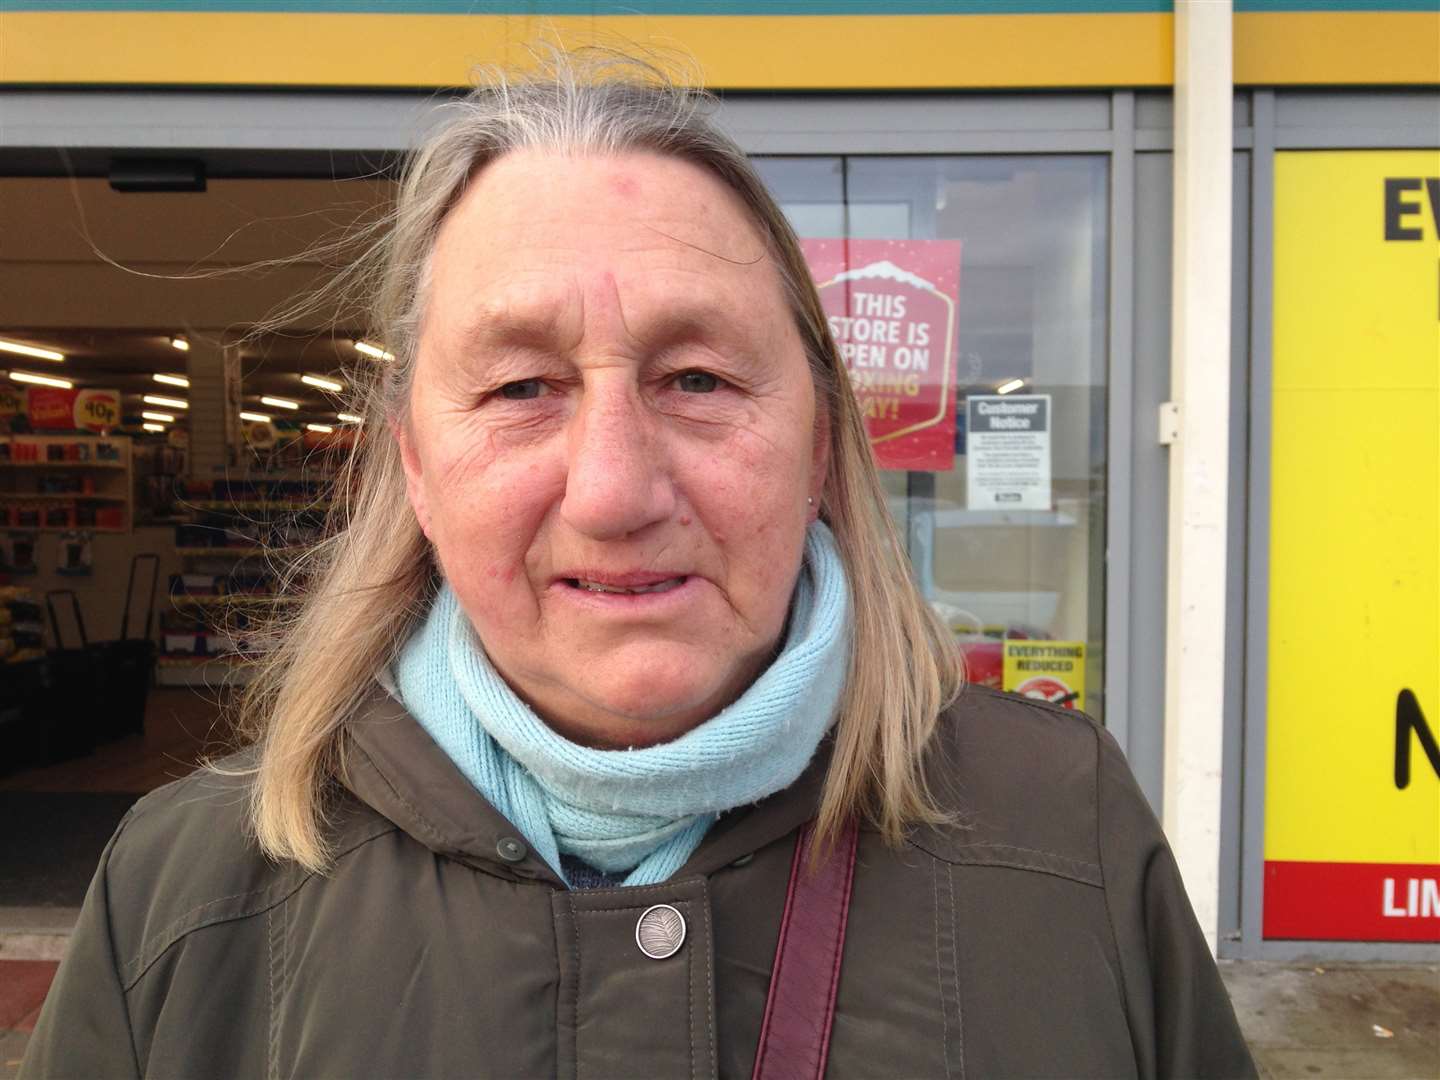 Patricia Rose from Hoo, thinks the store is good value